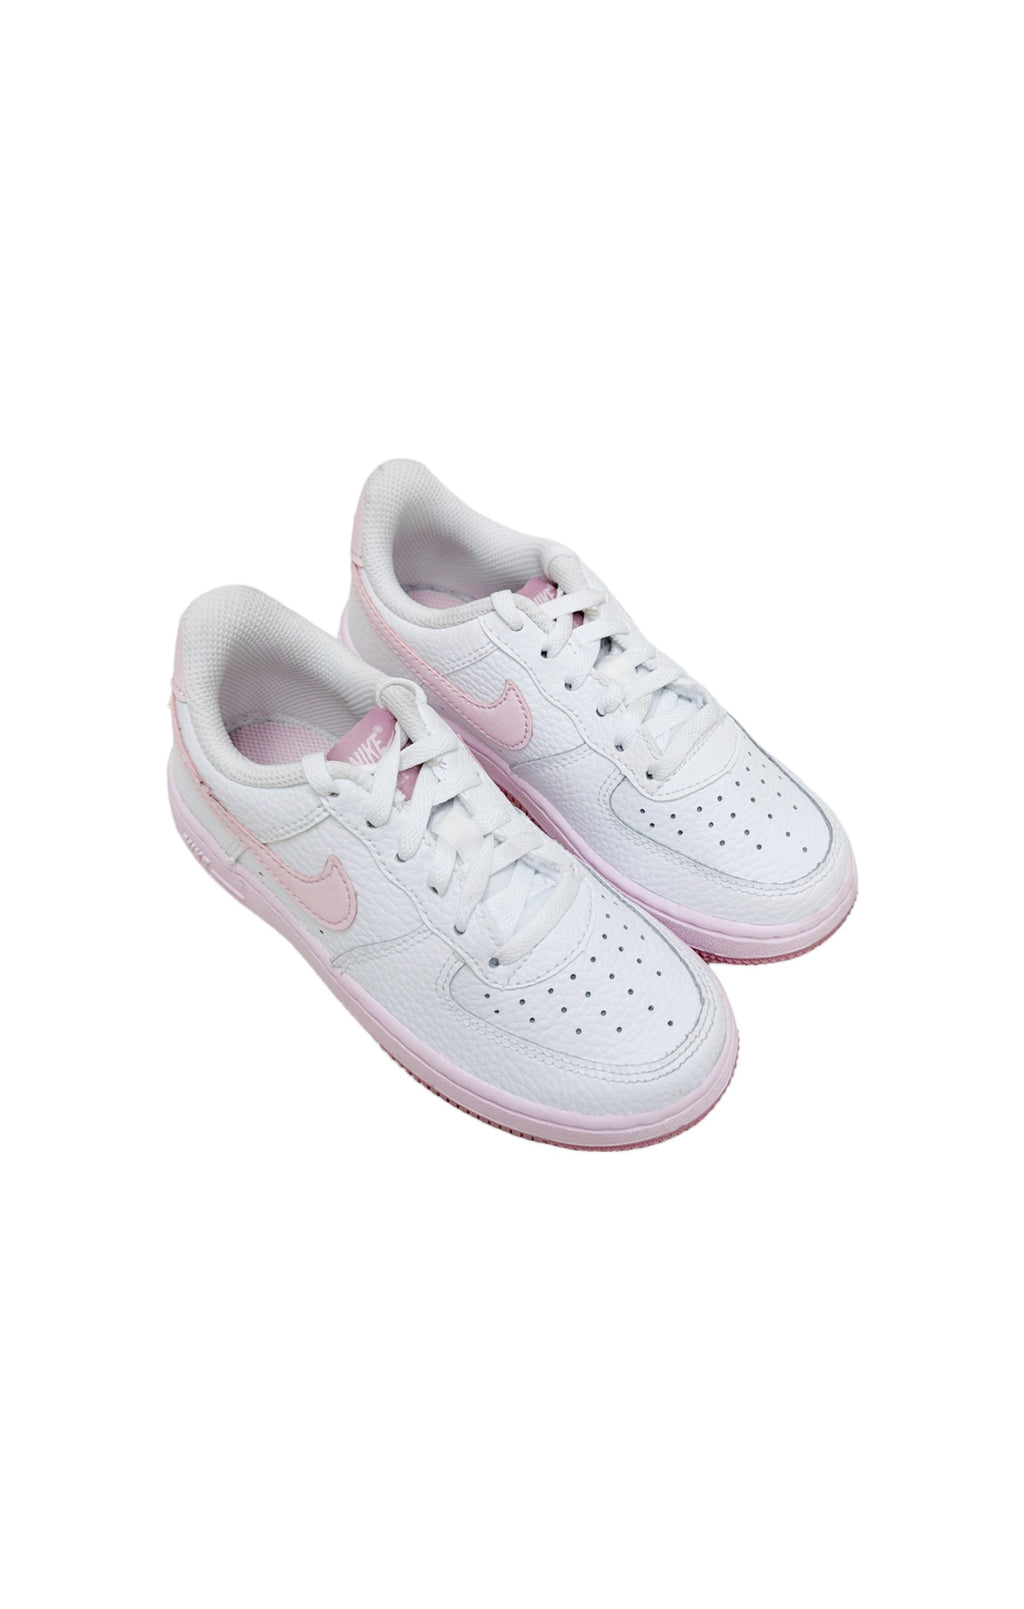 NIKE Sneakers Size: Toddler US 11.5C